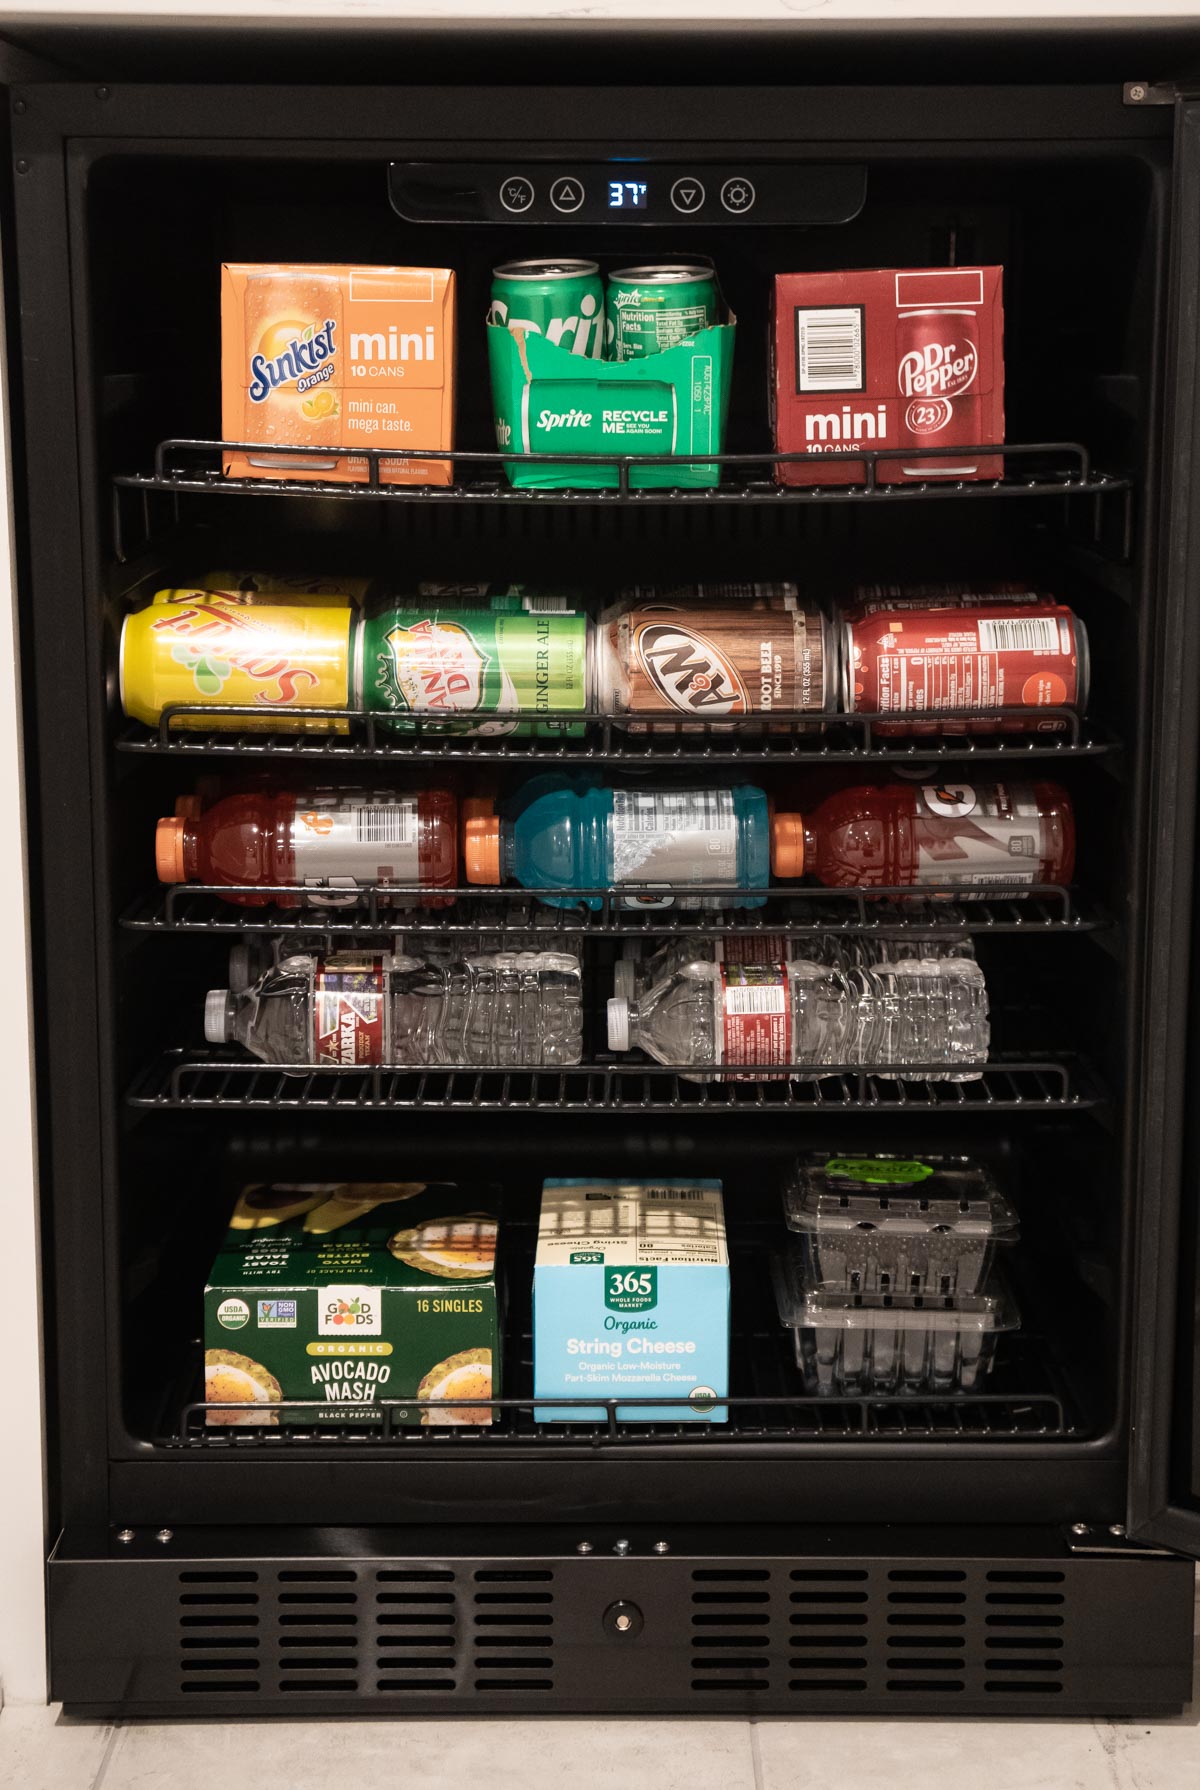 NewAir mini fridge filled with drinks and snacks